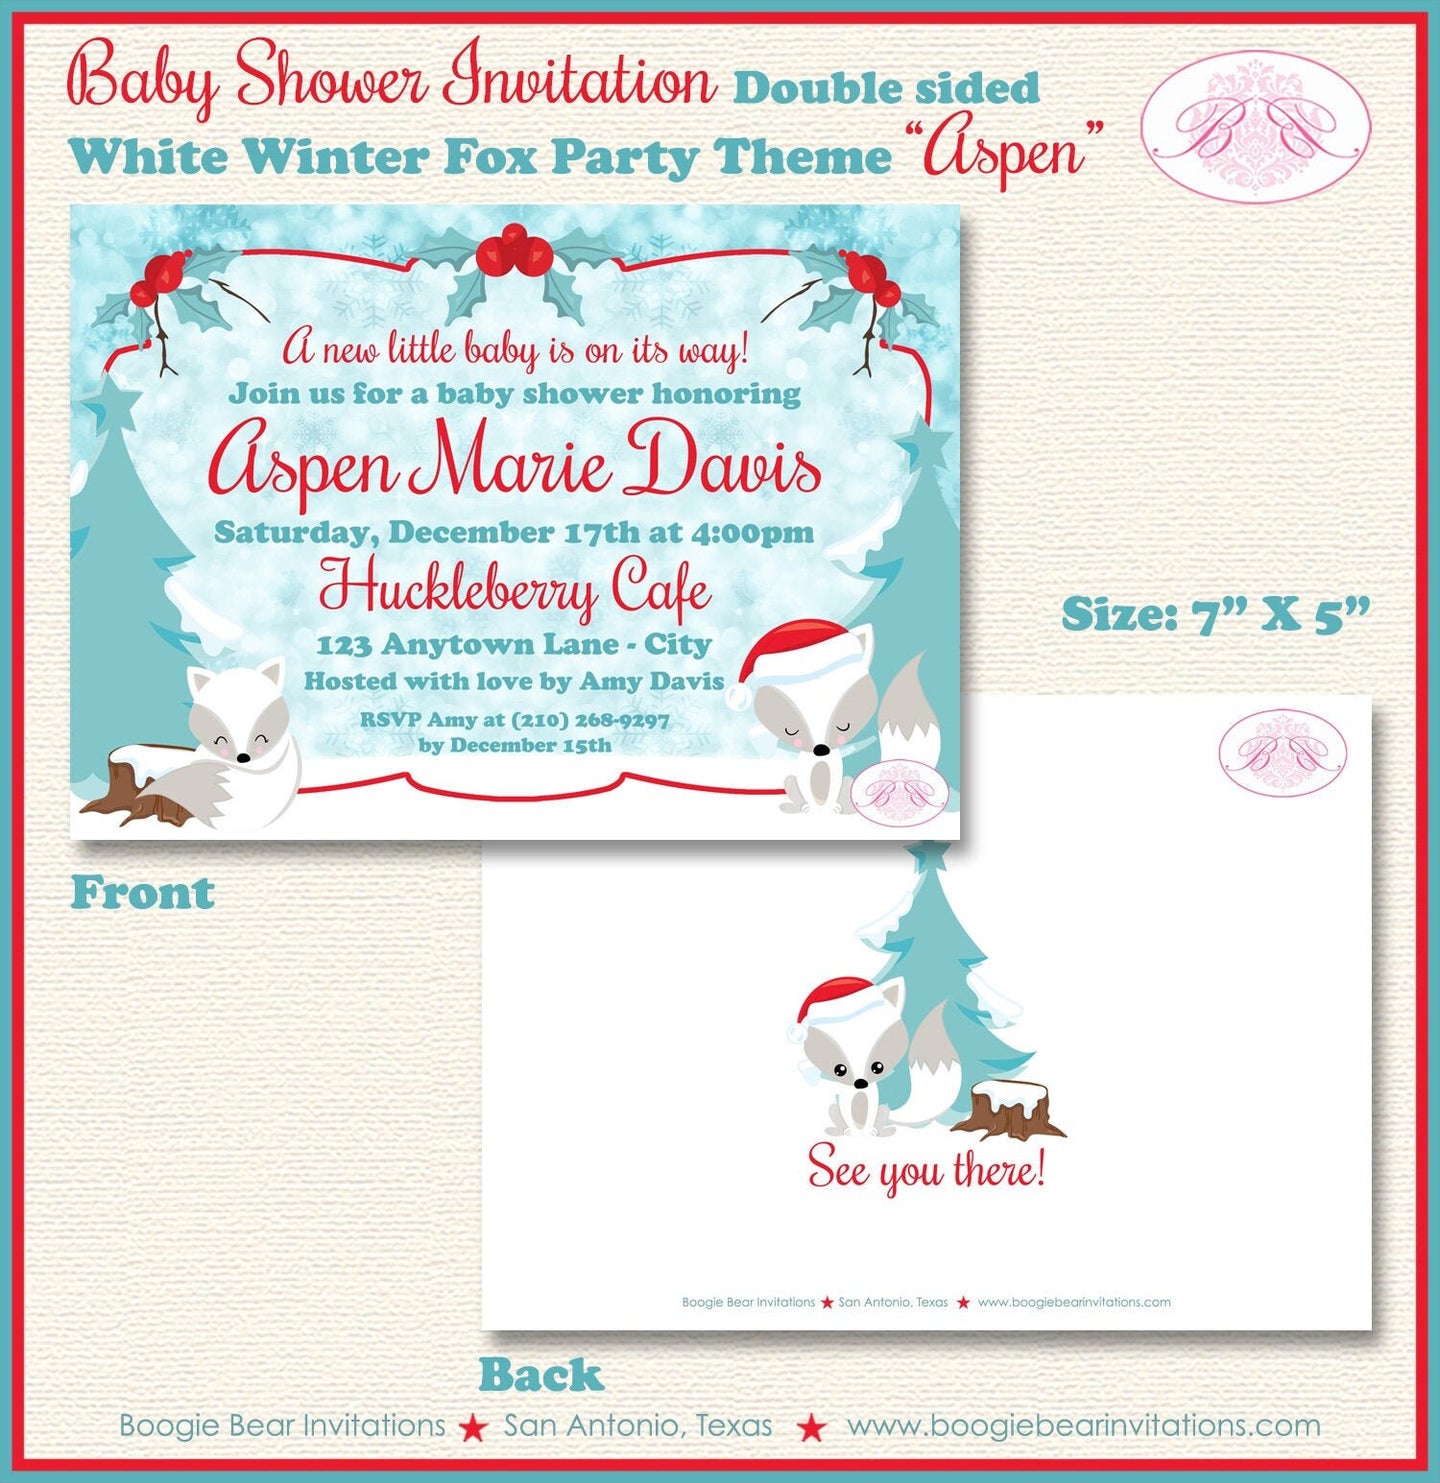 Woodland Winter Fox Baby Shower Invitation Christmas Holiday Snow White Red Boogie Bear Invitations Aspen Theme Paperless Printable Printed